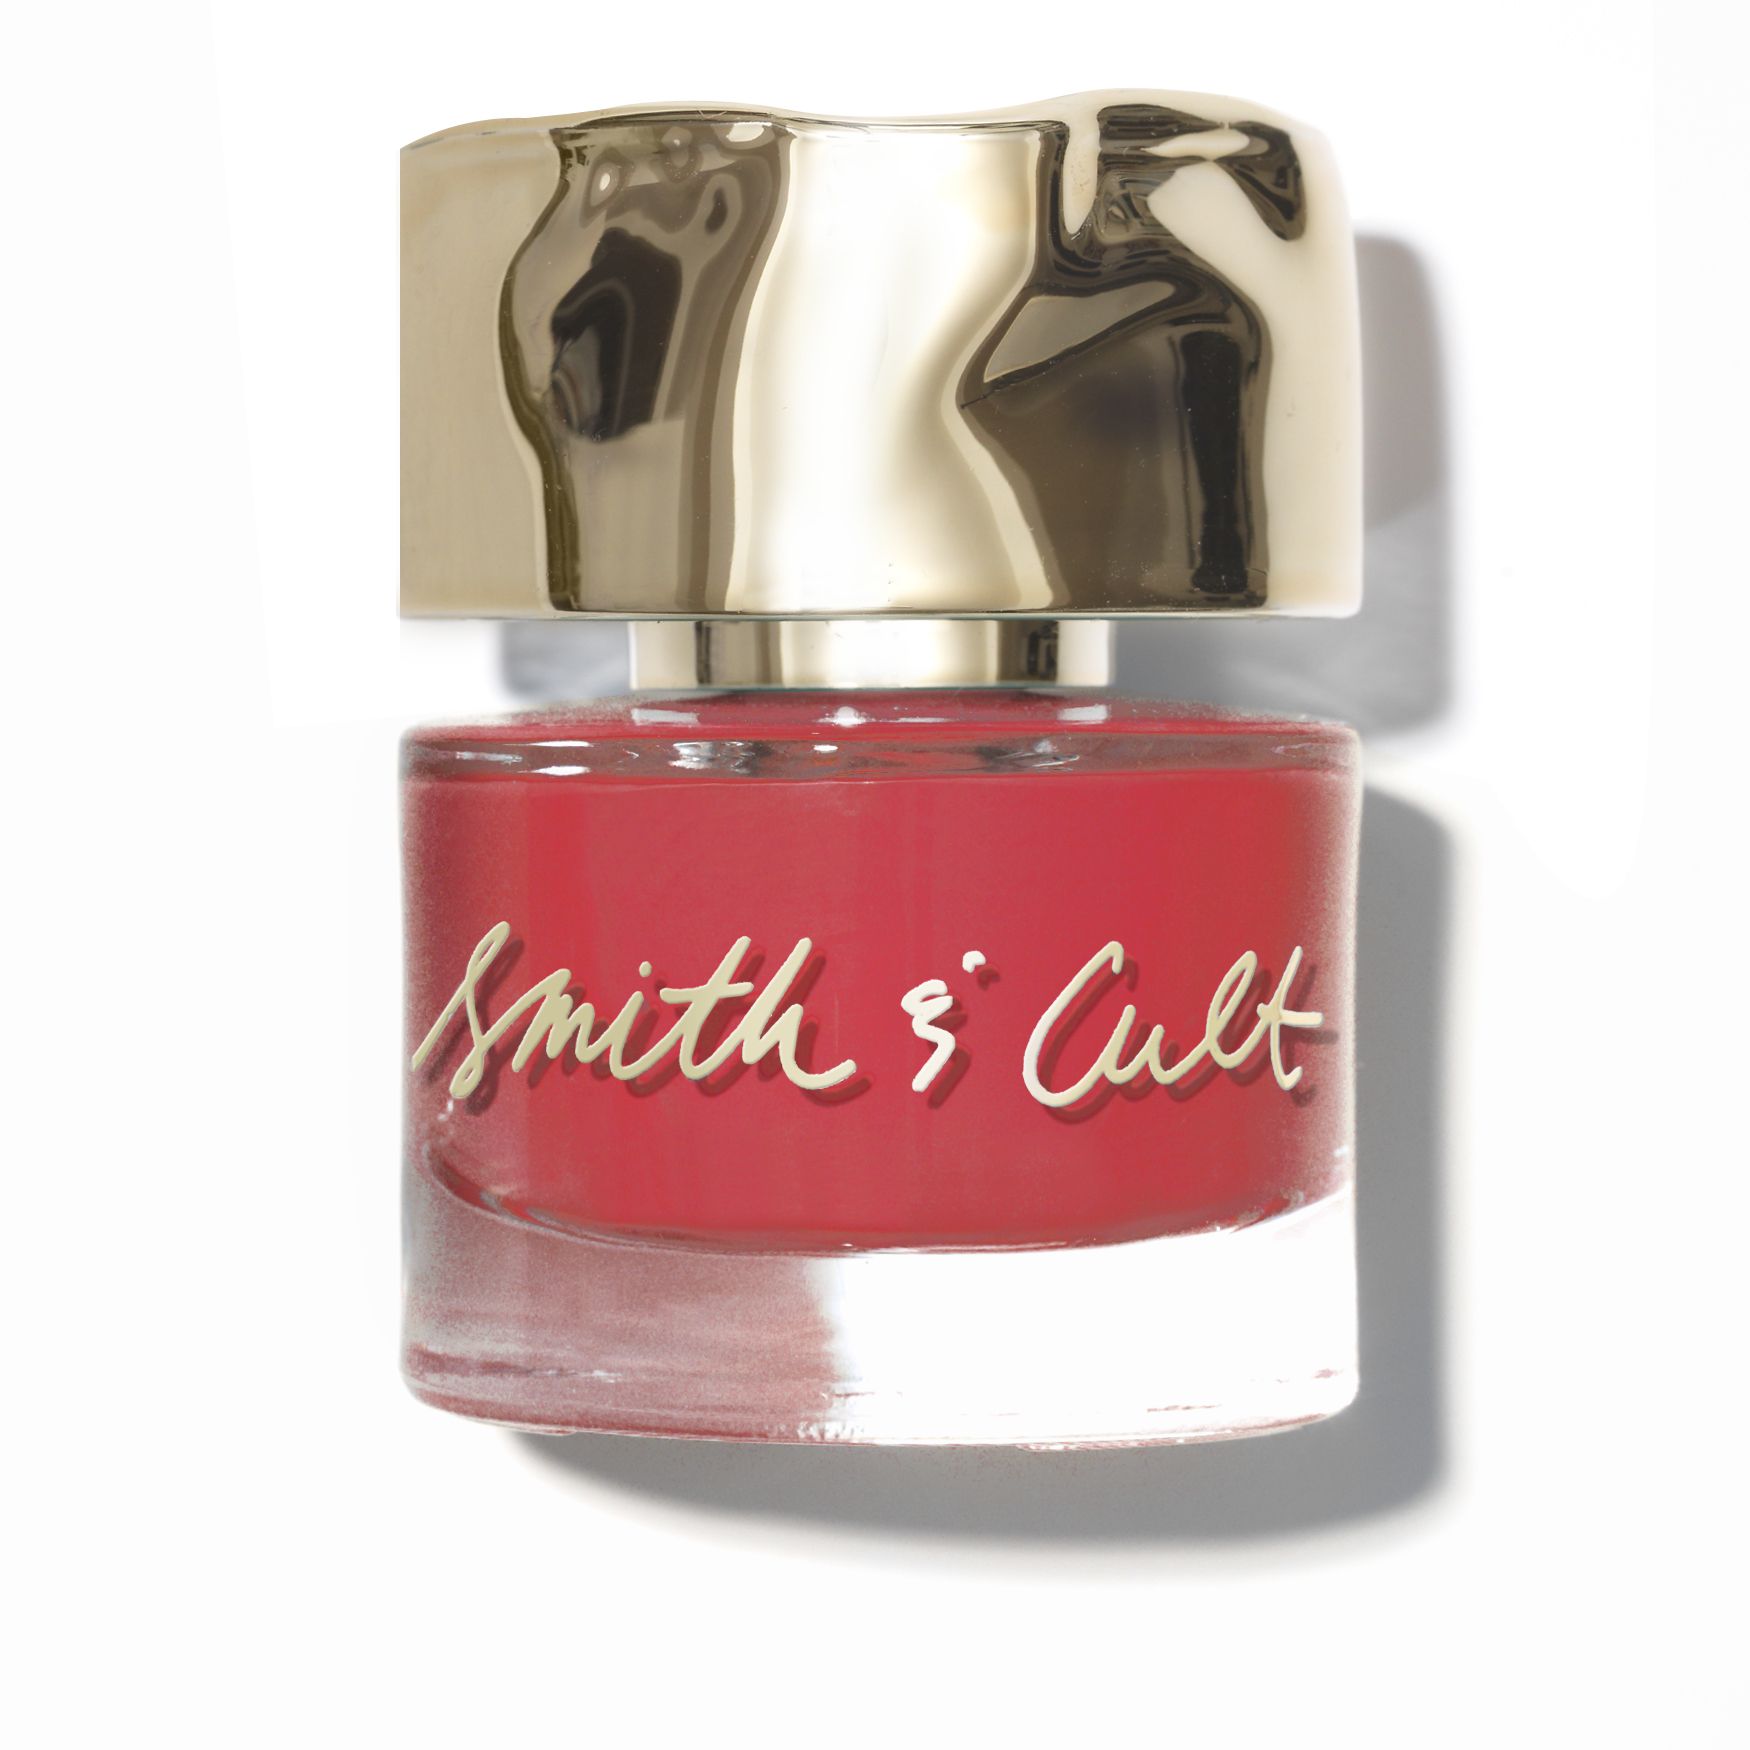 SMITH & CULT Psycho Candy Nail Lacquer | Space NK (US)